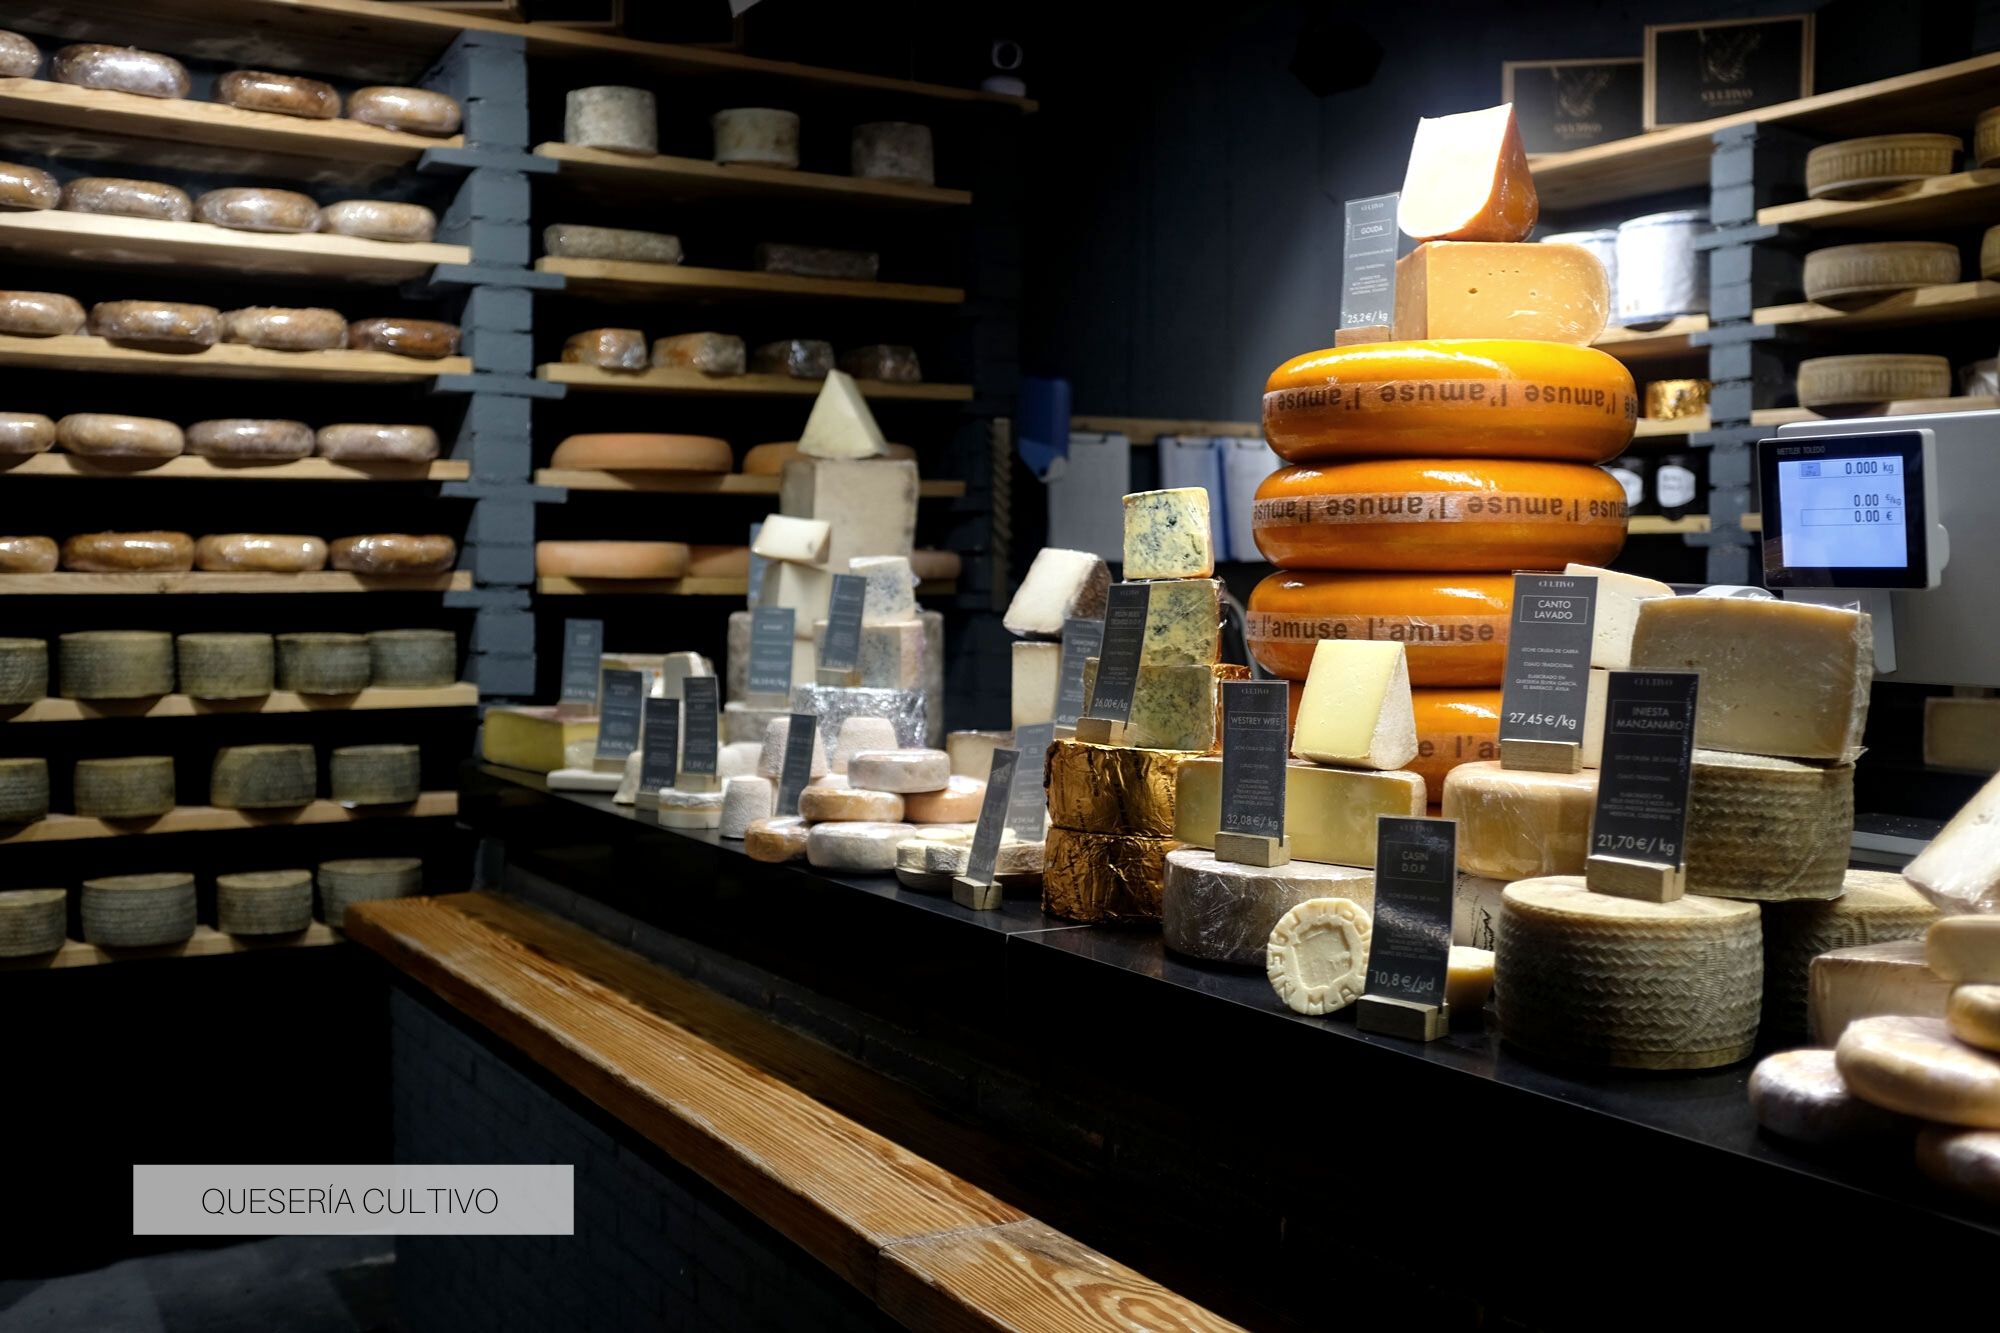 The large counter of cheeses at Quesería Cultivo